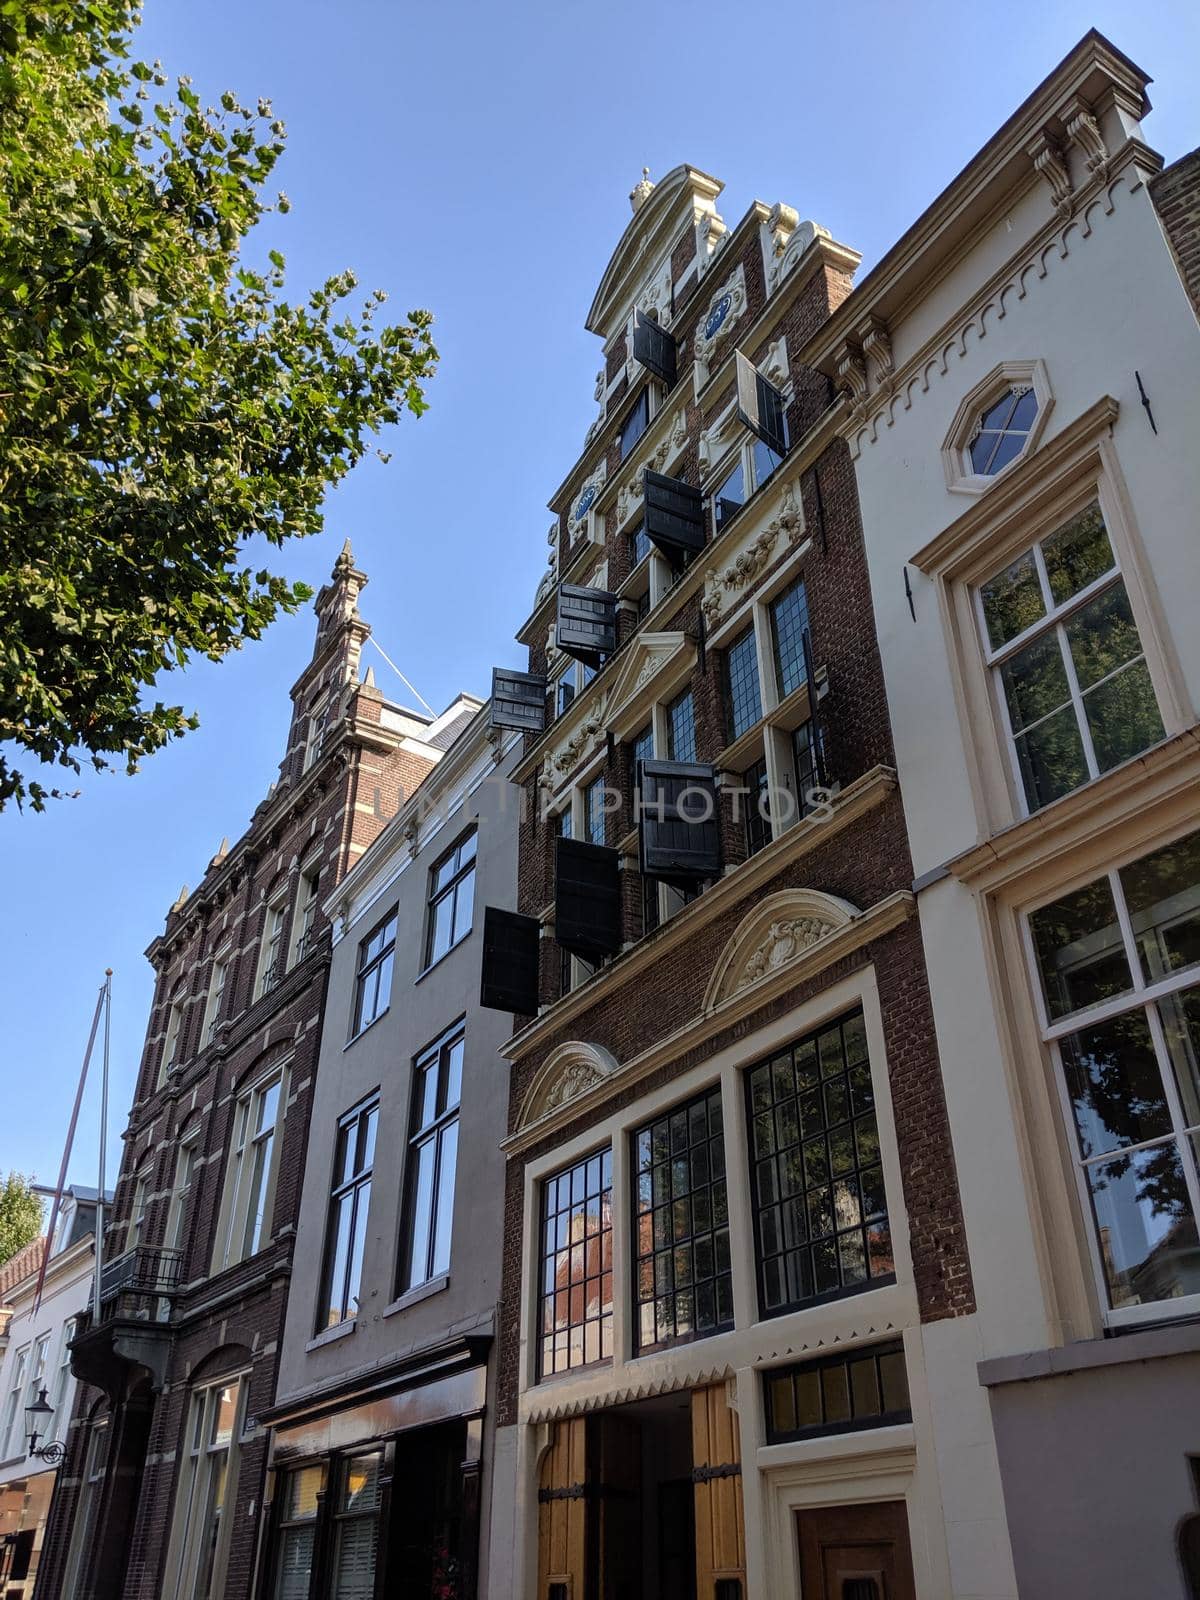 Architecture in the old town of Deventer, The Netherlands